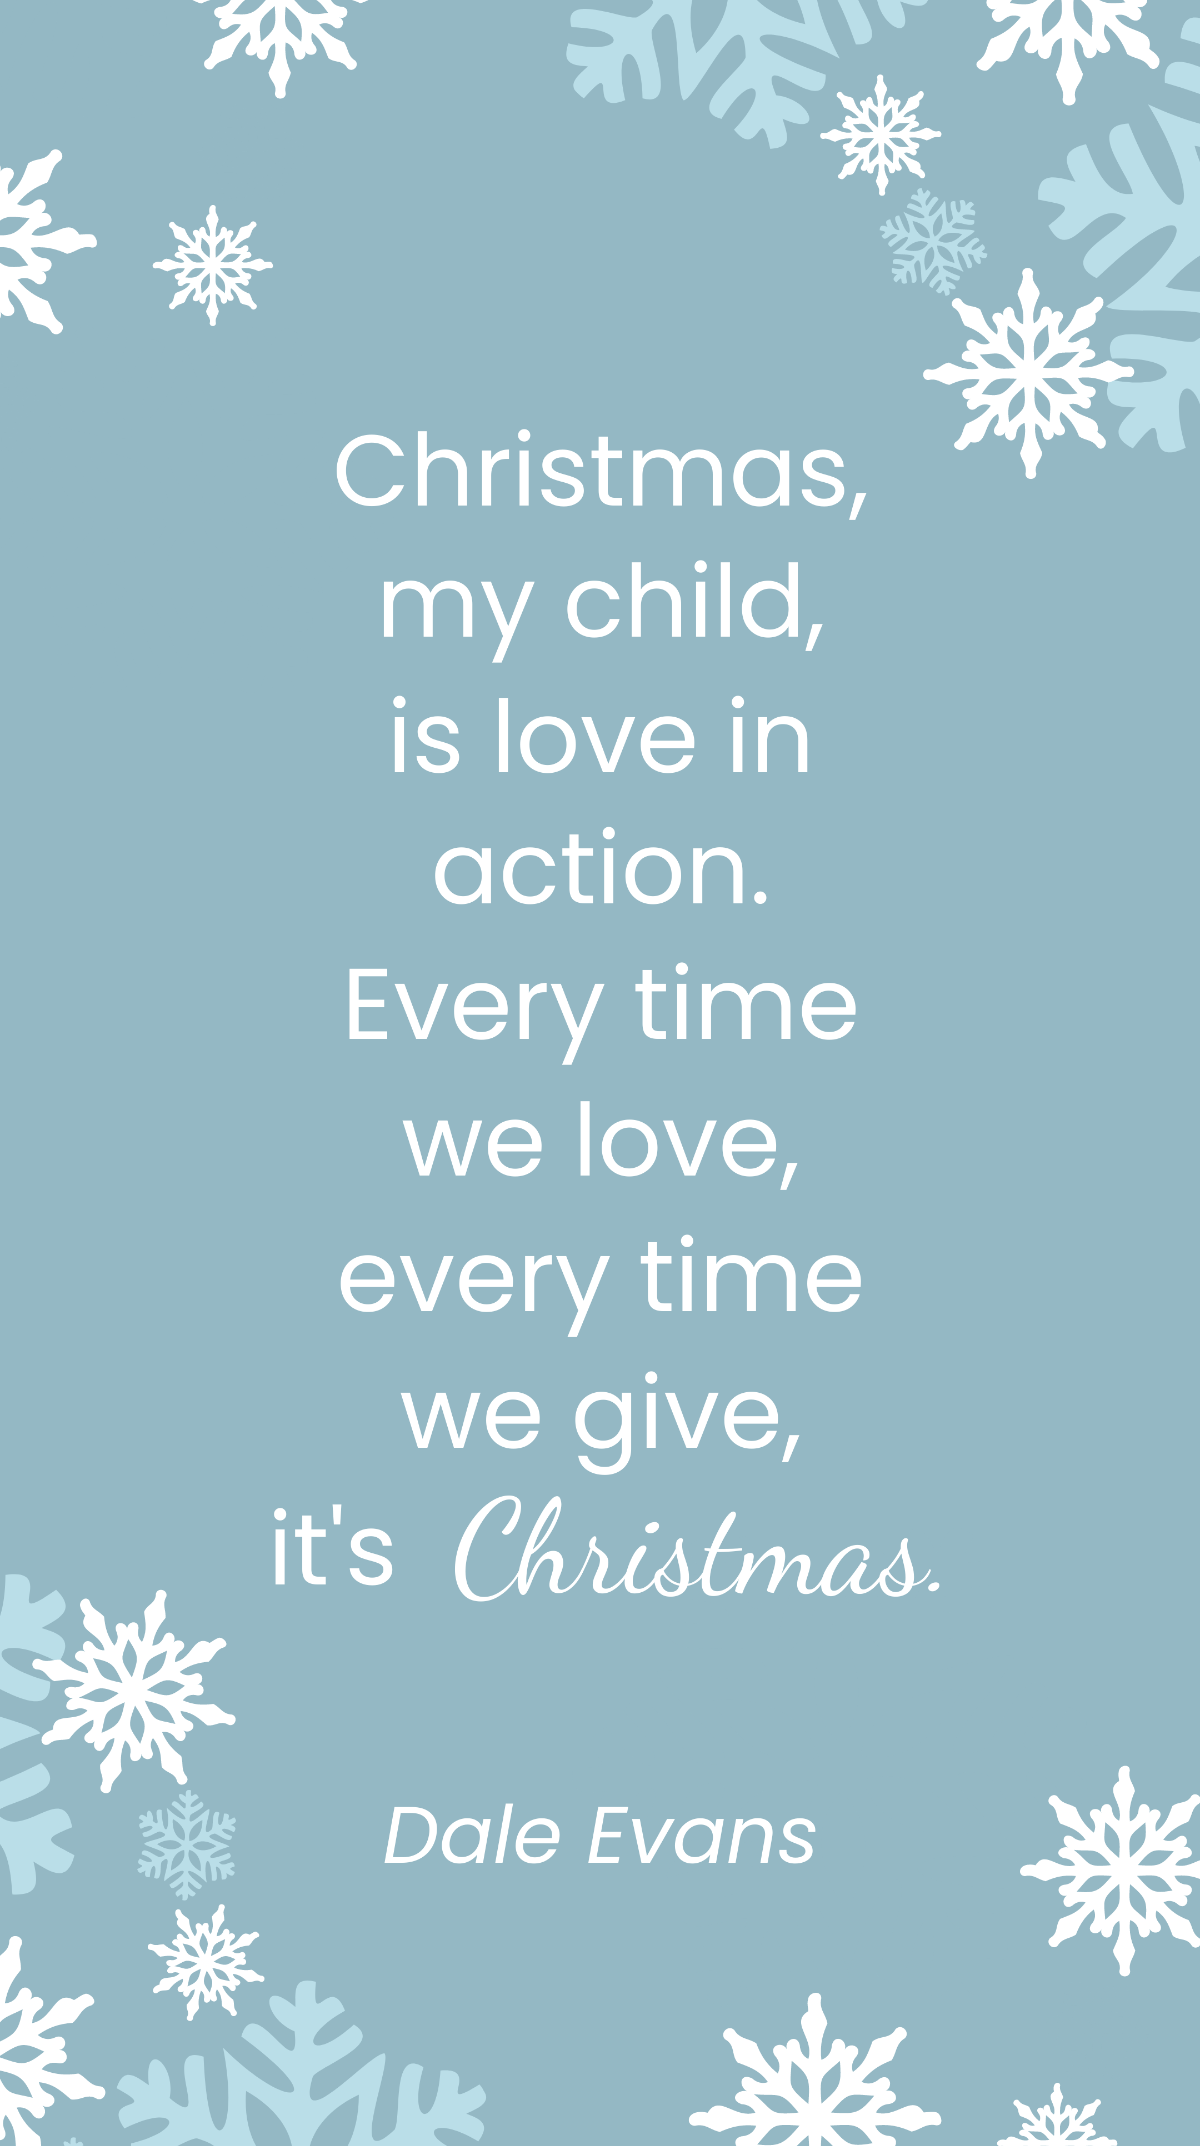 Dale Evans - Christmas, my child, is love in action. Every time we love, every time we give, it's Christmas. Template